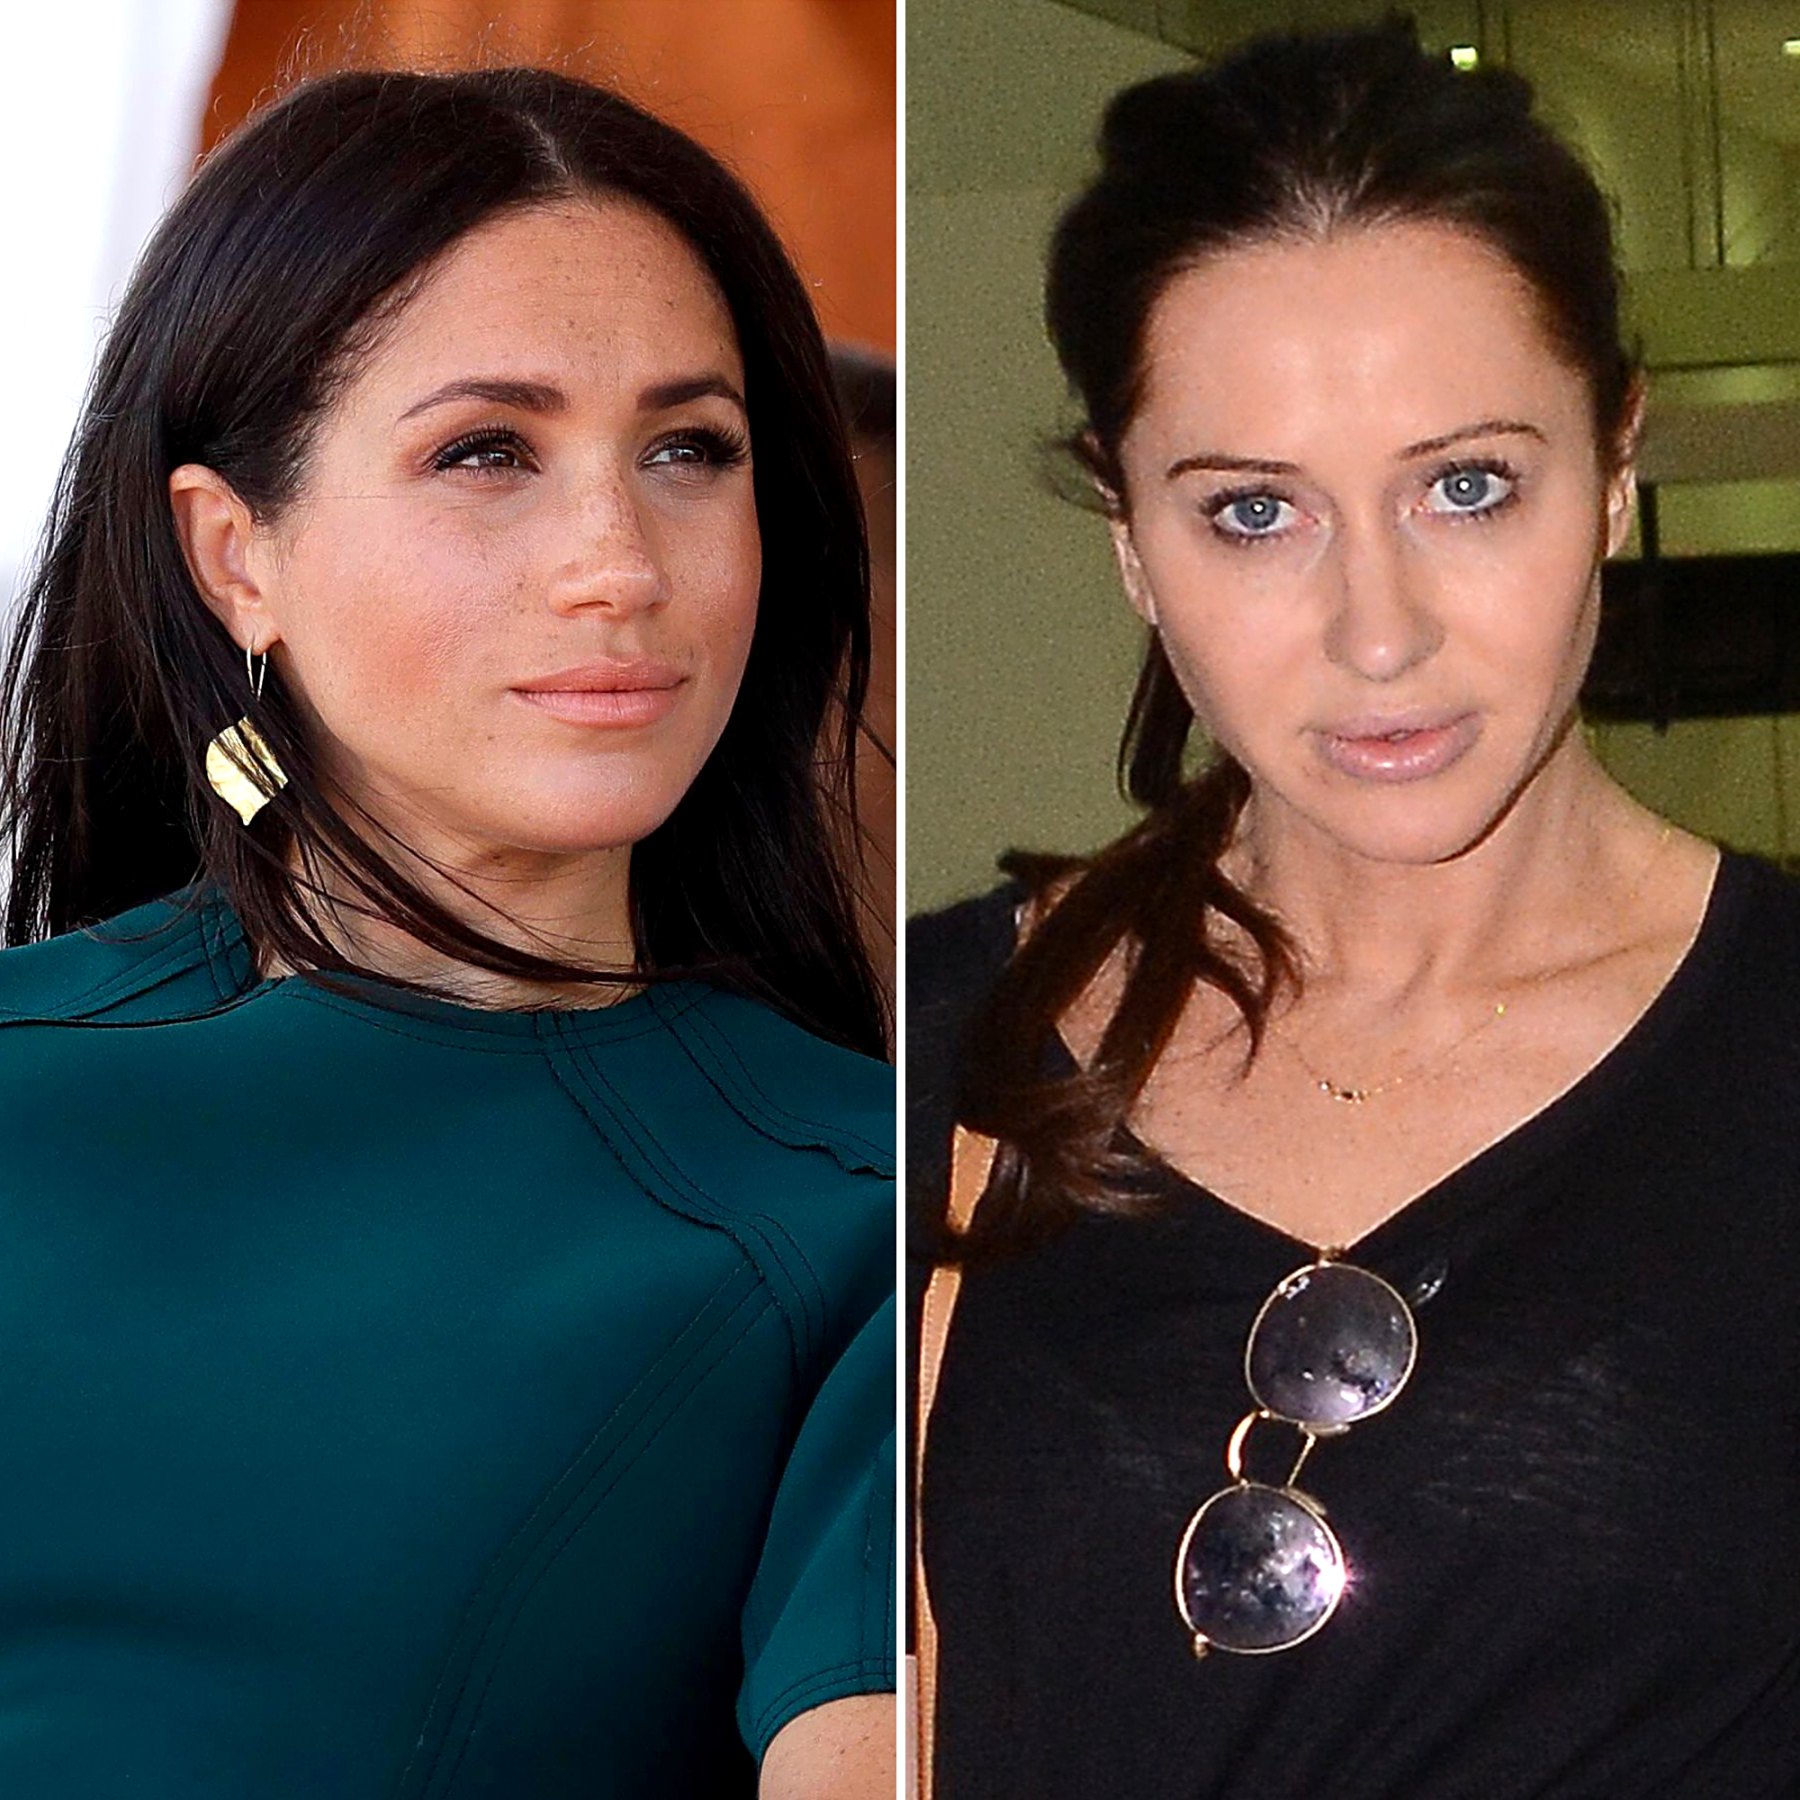 Meghan Markle Is Done With Bff Jessica Mulroney Amid Backlash Us Weekly 